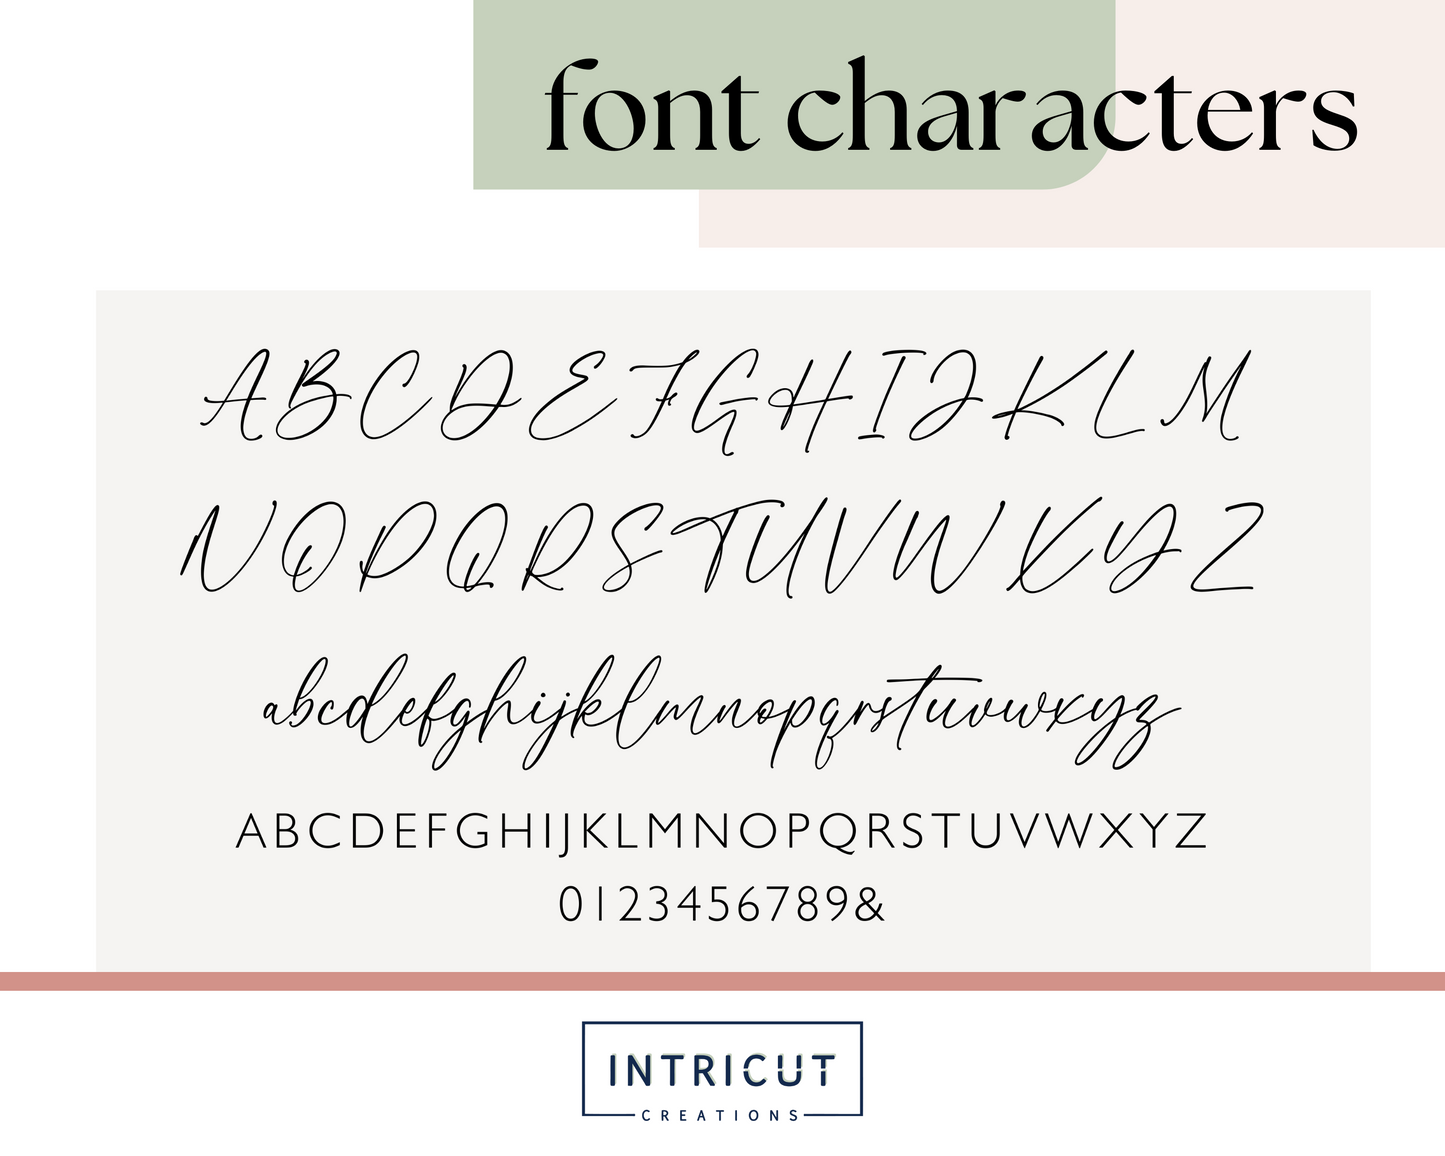 font character visual of each letter